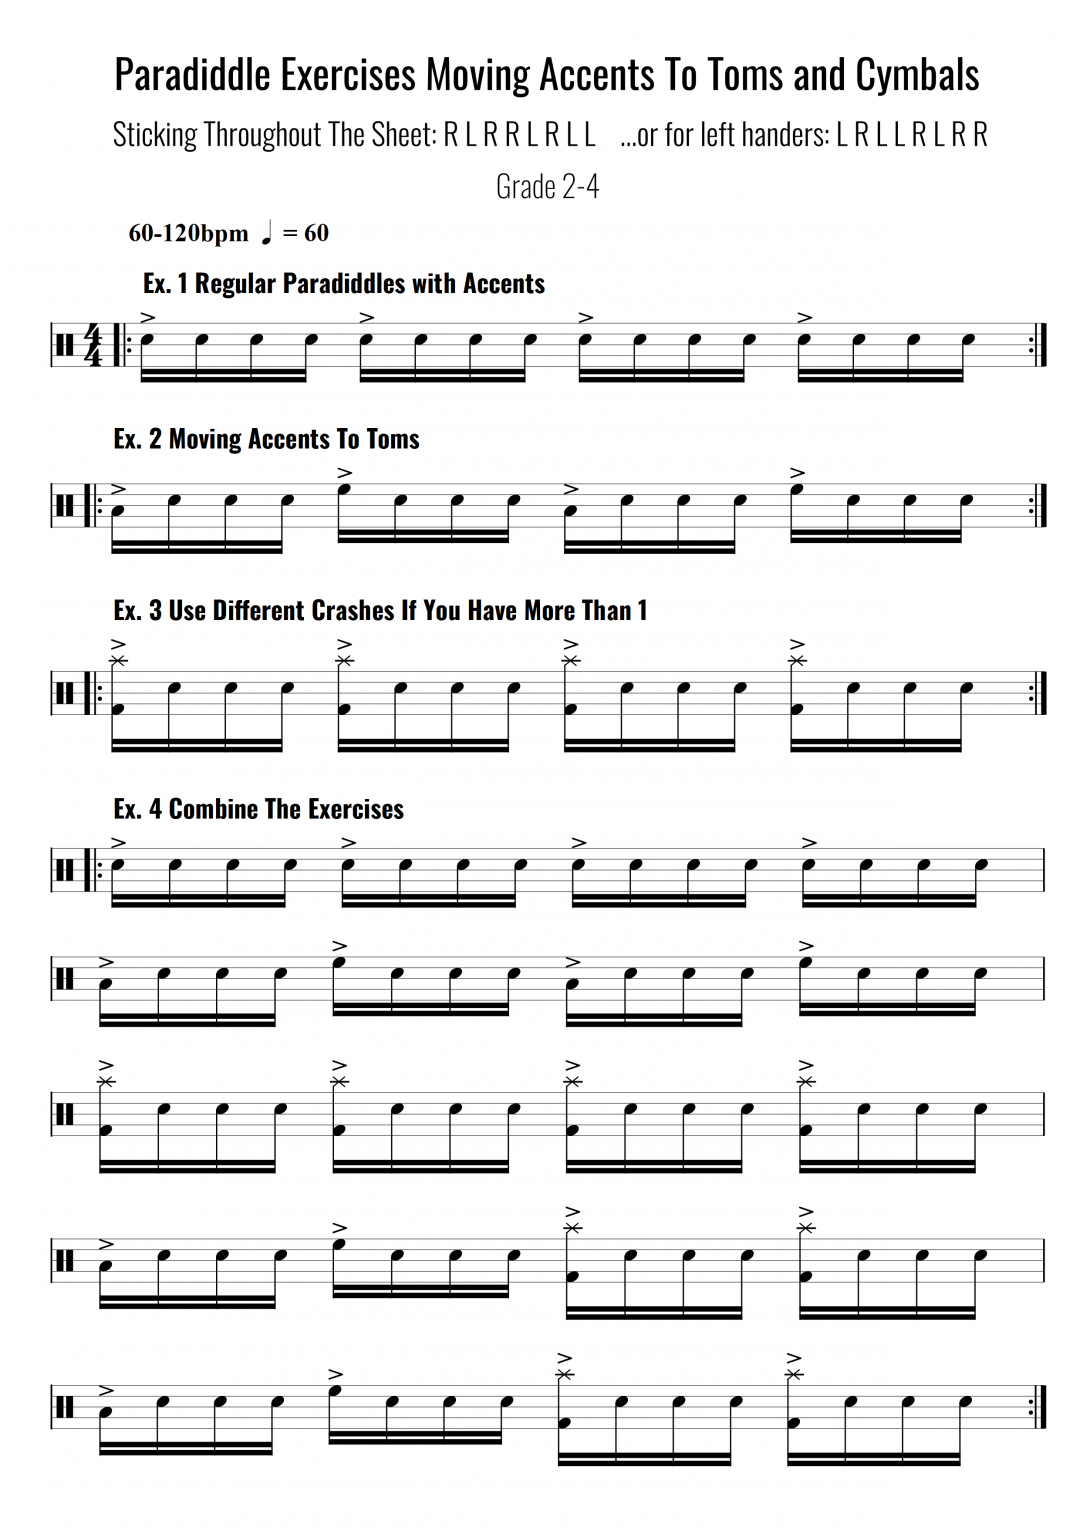 Paradiddle Exercises Moving Accents To Toms and Cymbals